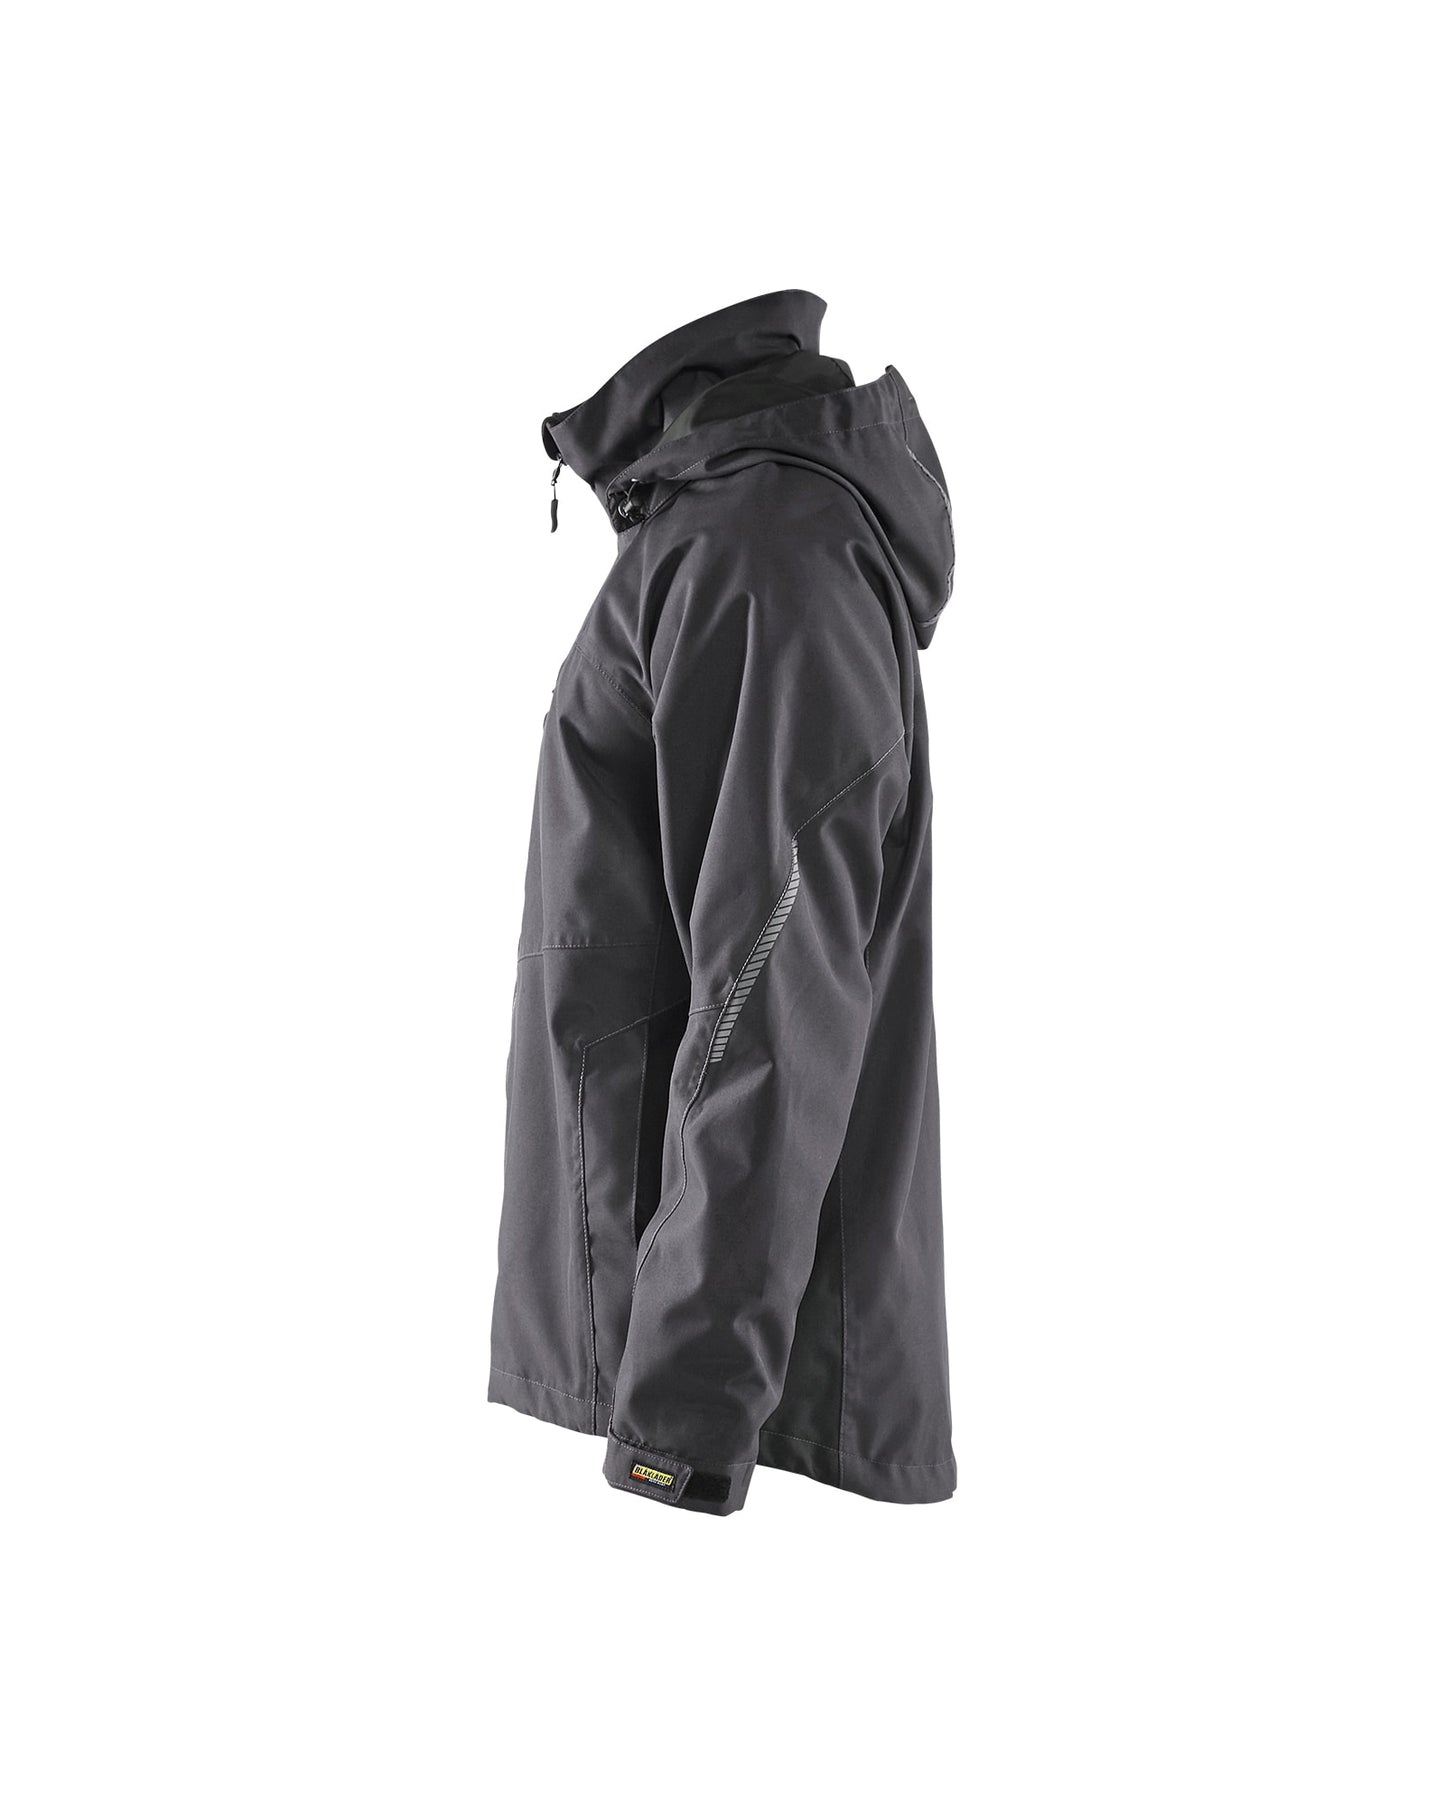 4890 LIGHTWEIGHT LINED FUNCTIONAL JACKET